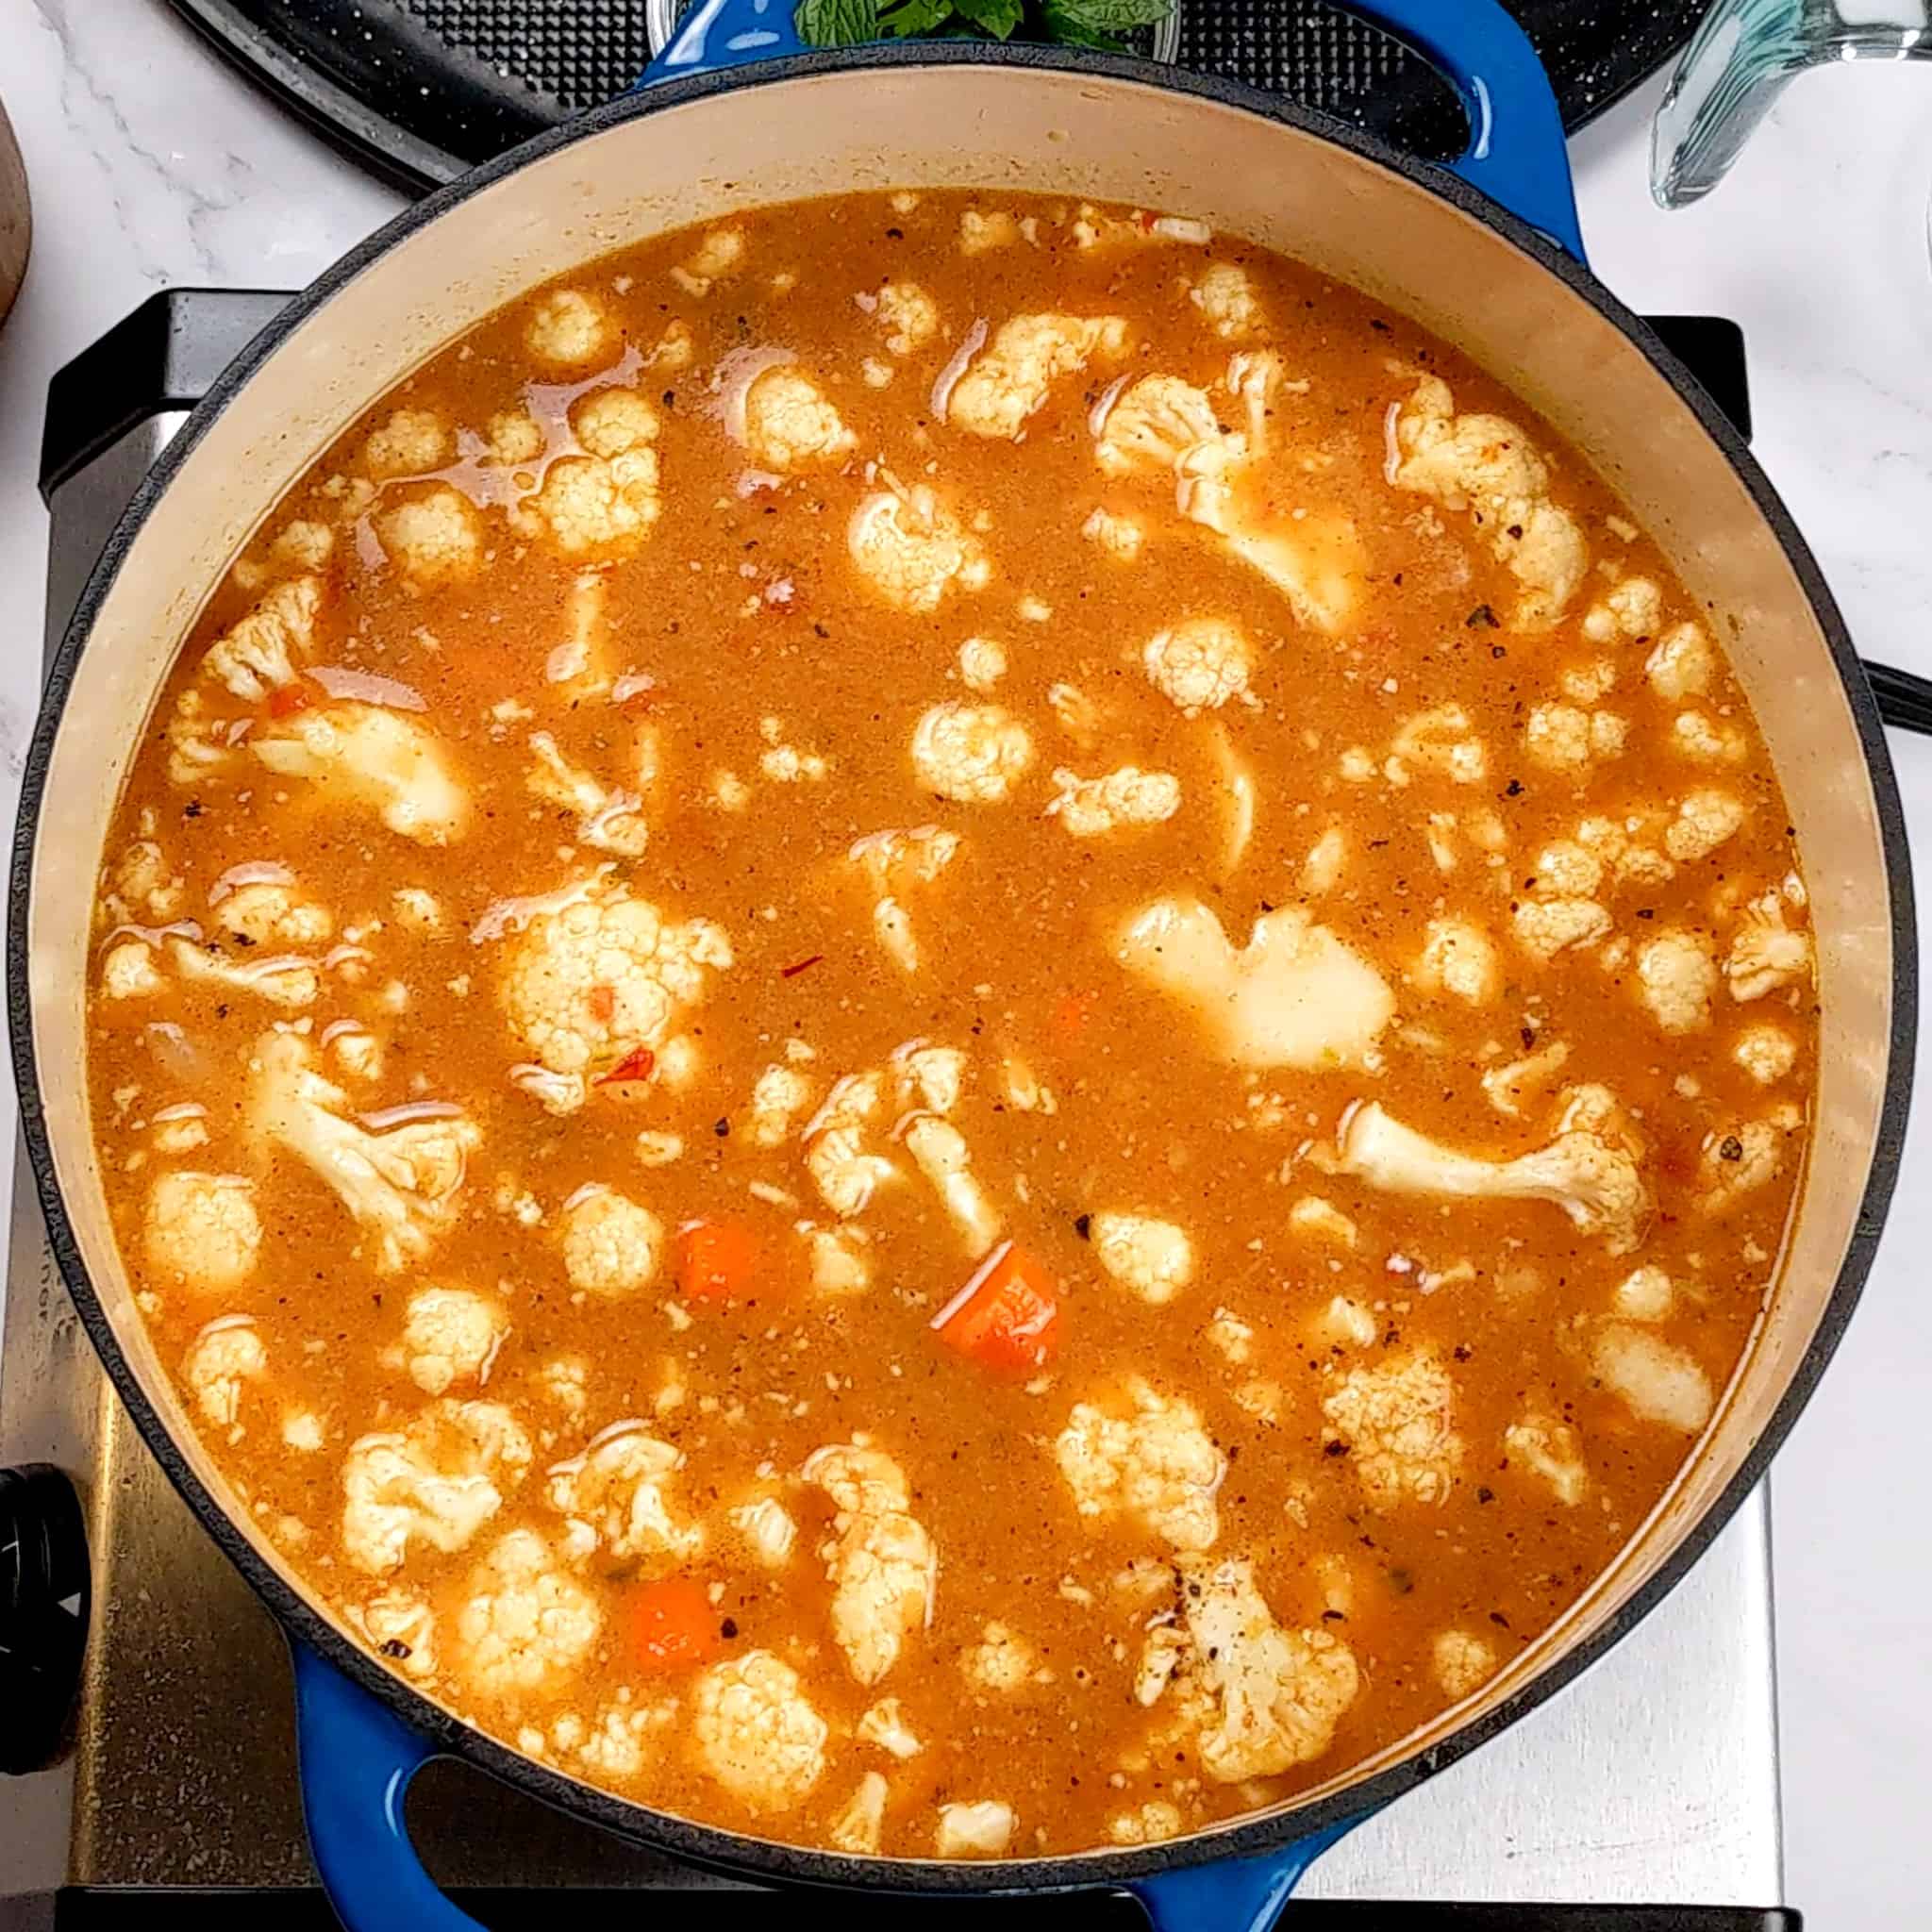 tomato base broth with floating cauliflower florets in a dutch oven